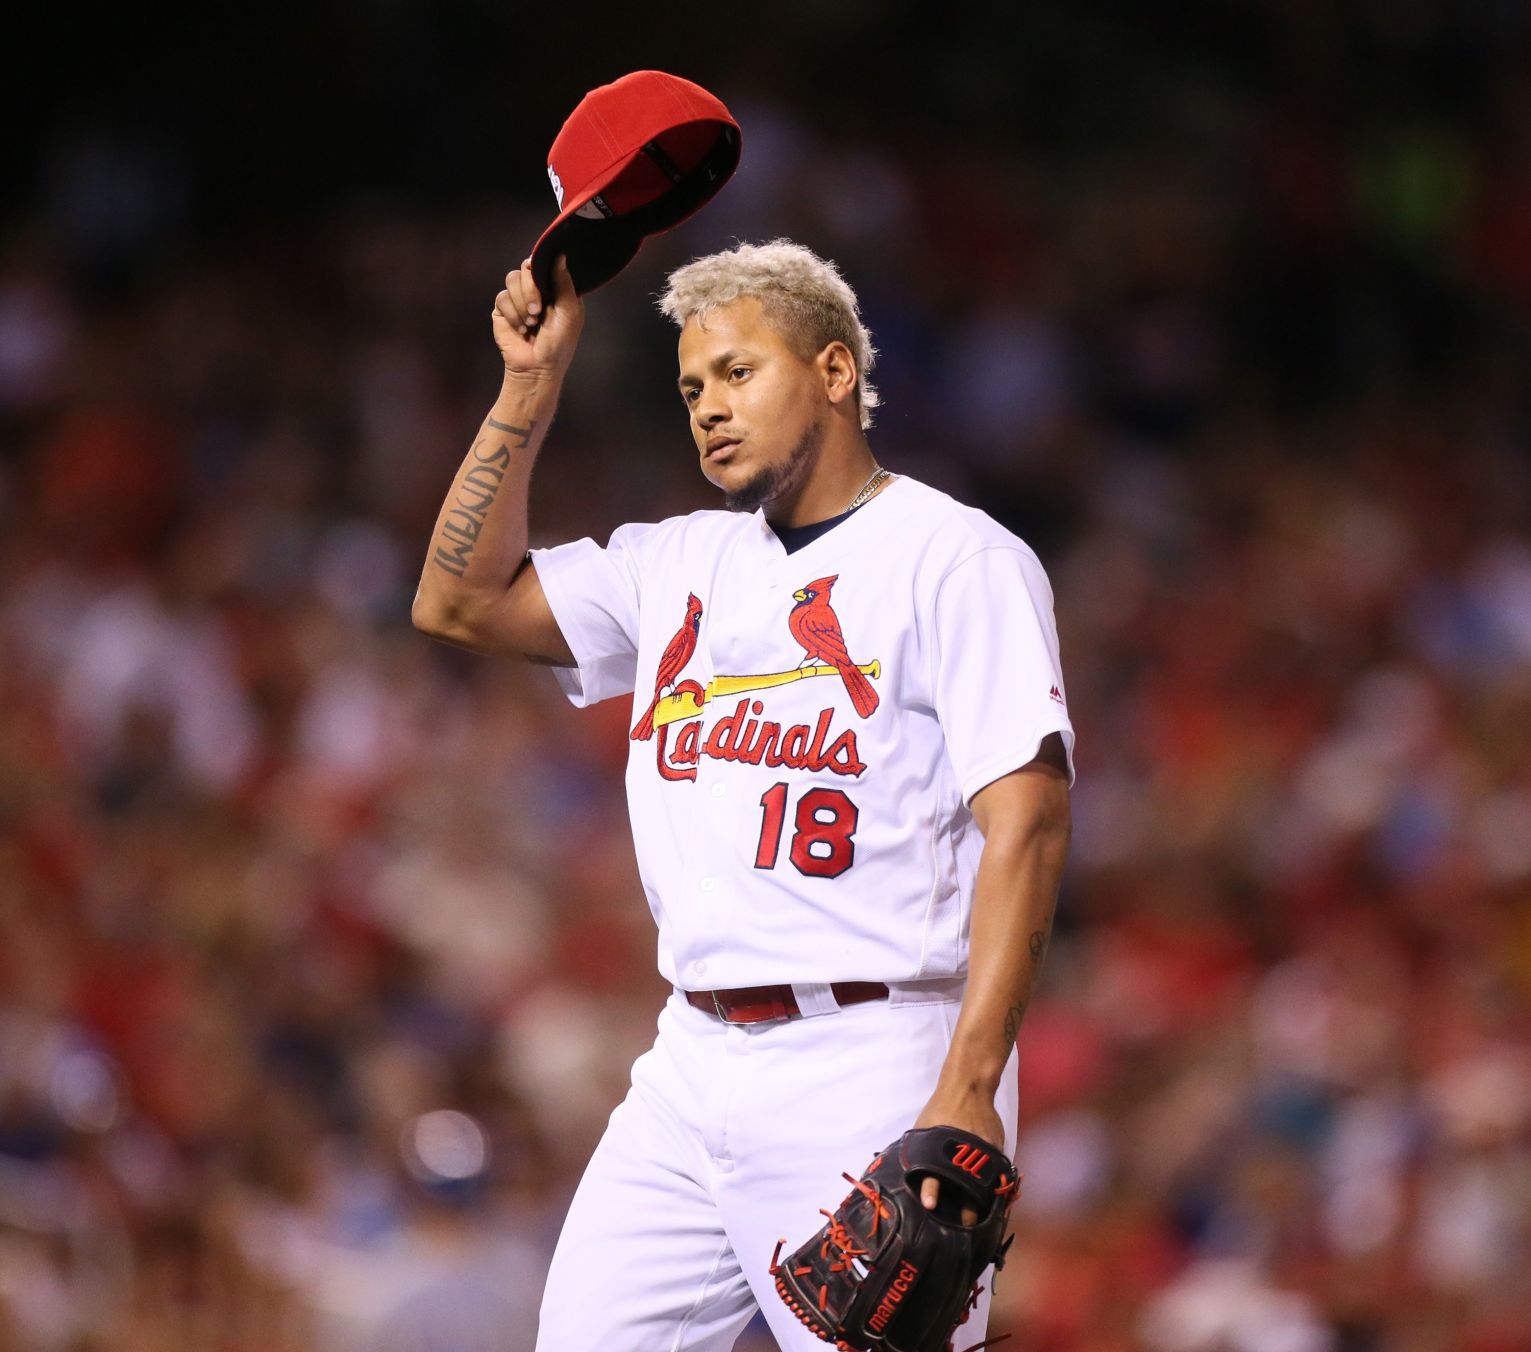 Carlos Martinez agrees to 5-year, $51 